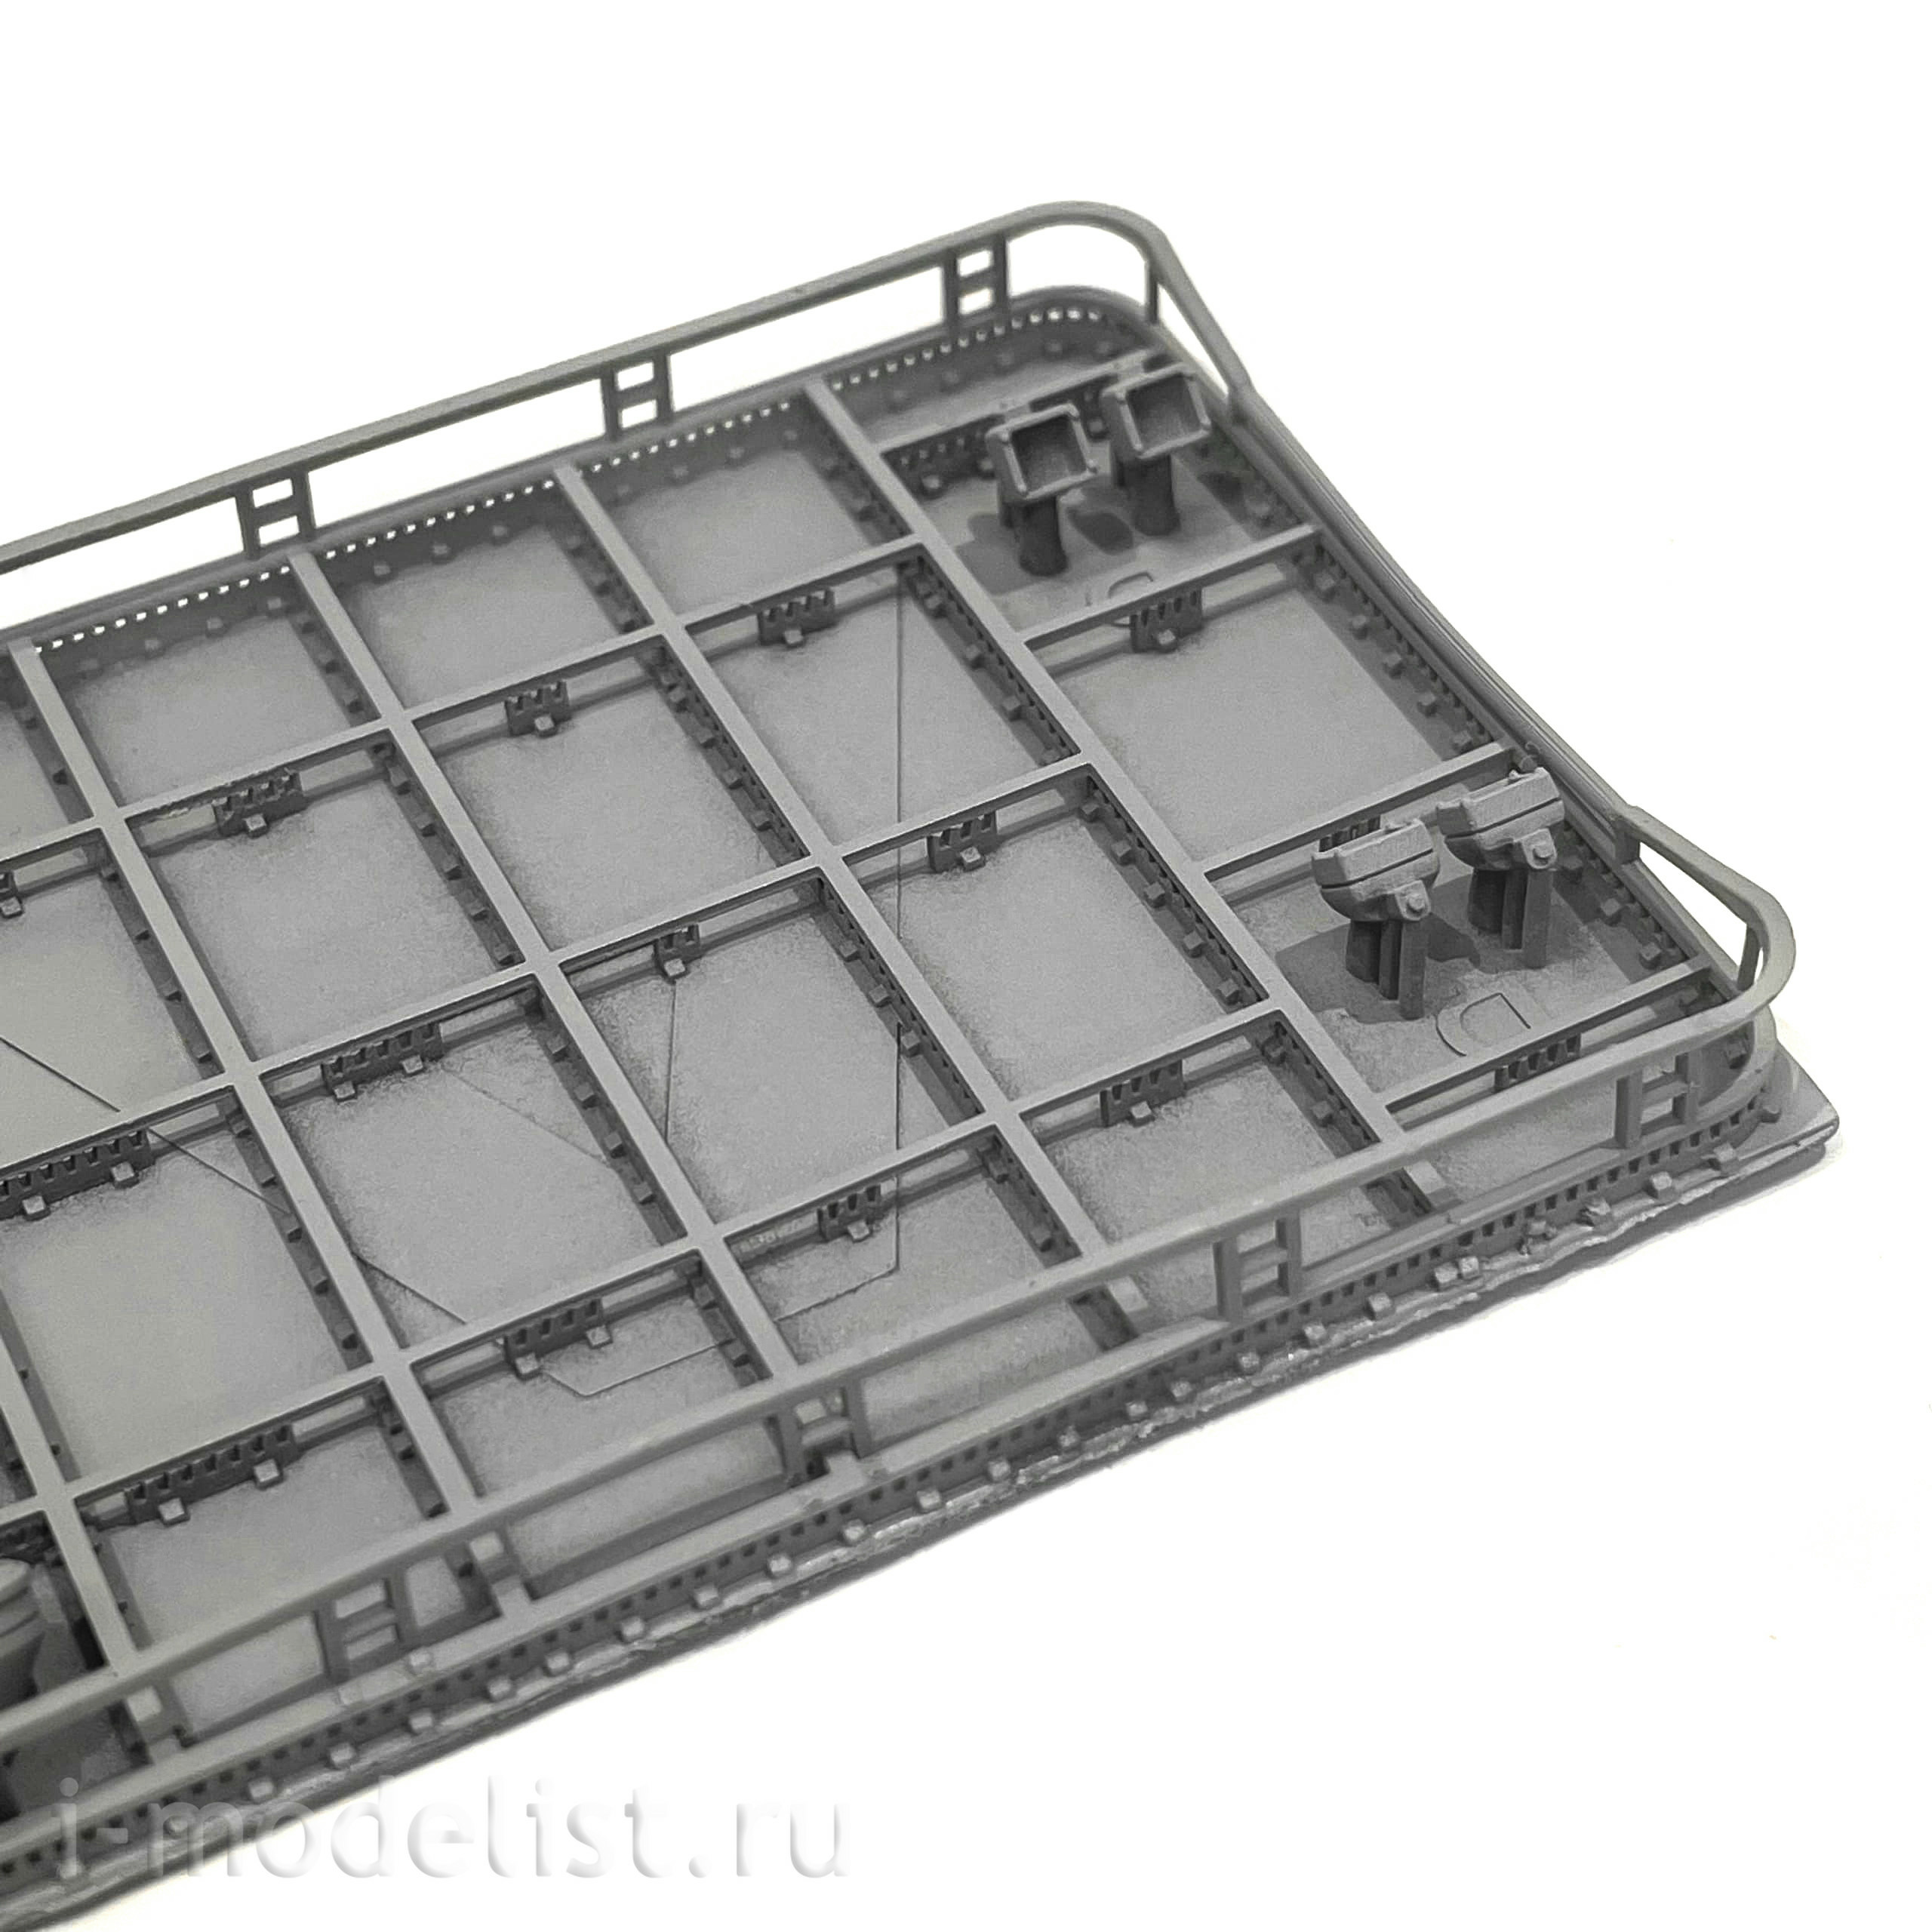 Im35049 Imodelist 1/35 Trunk for the off-road version for 